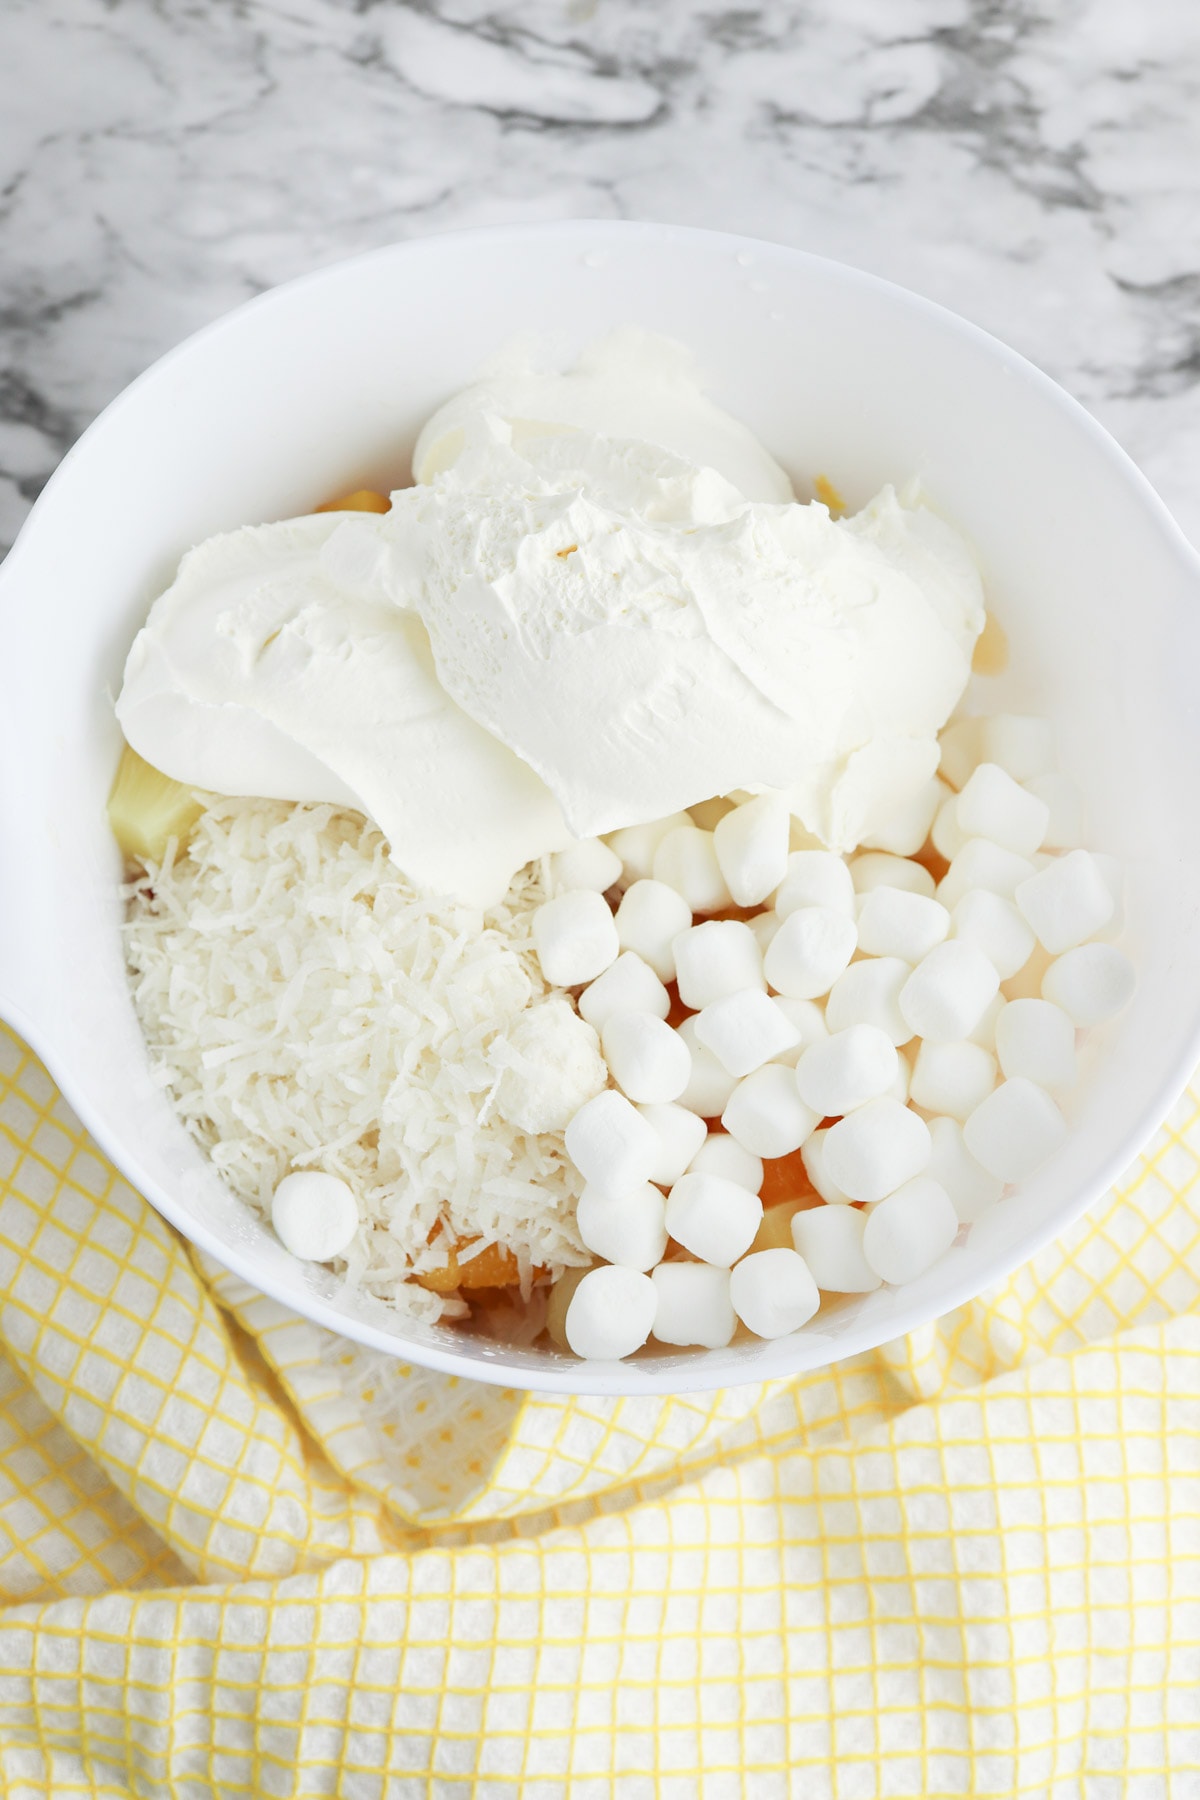 Coconut and Cool Whip added to white bowl